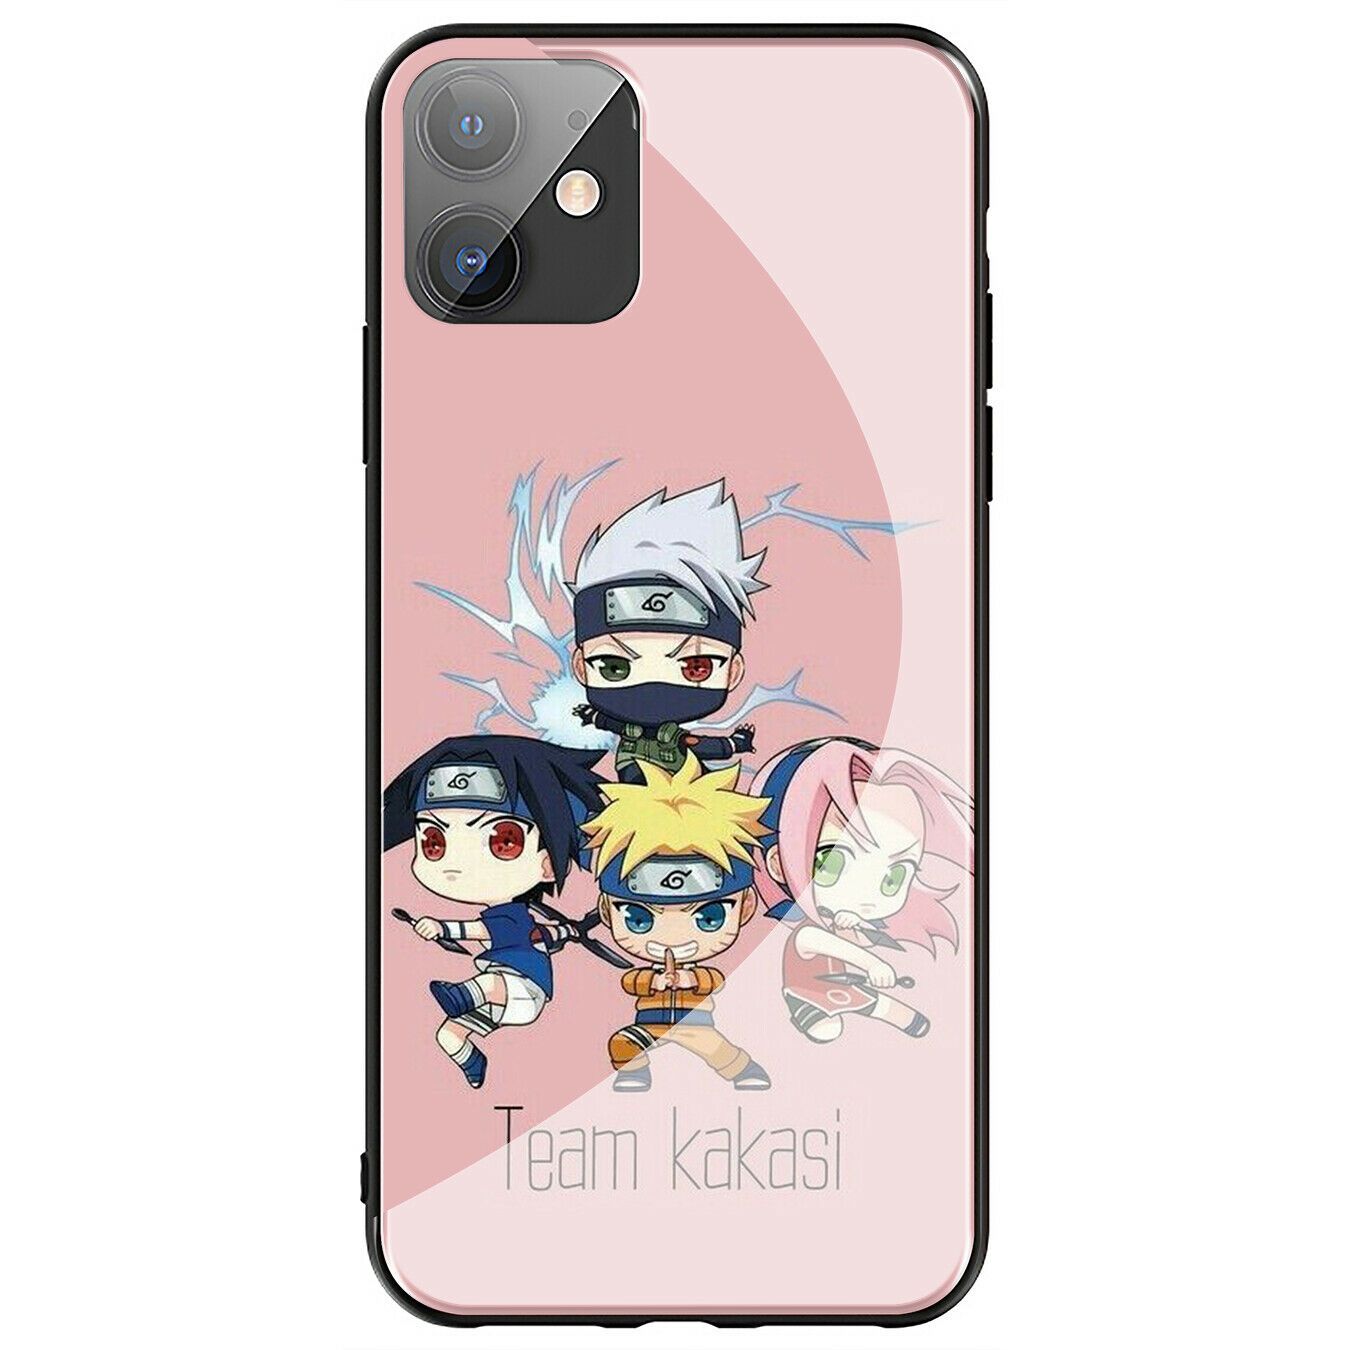 Sasuke NARUTO Akatsuki Glass Case for iPhone 11 Pro XR X XS Max 8 7 6 6s Plus + iPhone Cases AtlasCase 5 for iPhone 6/6S 